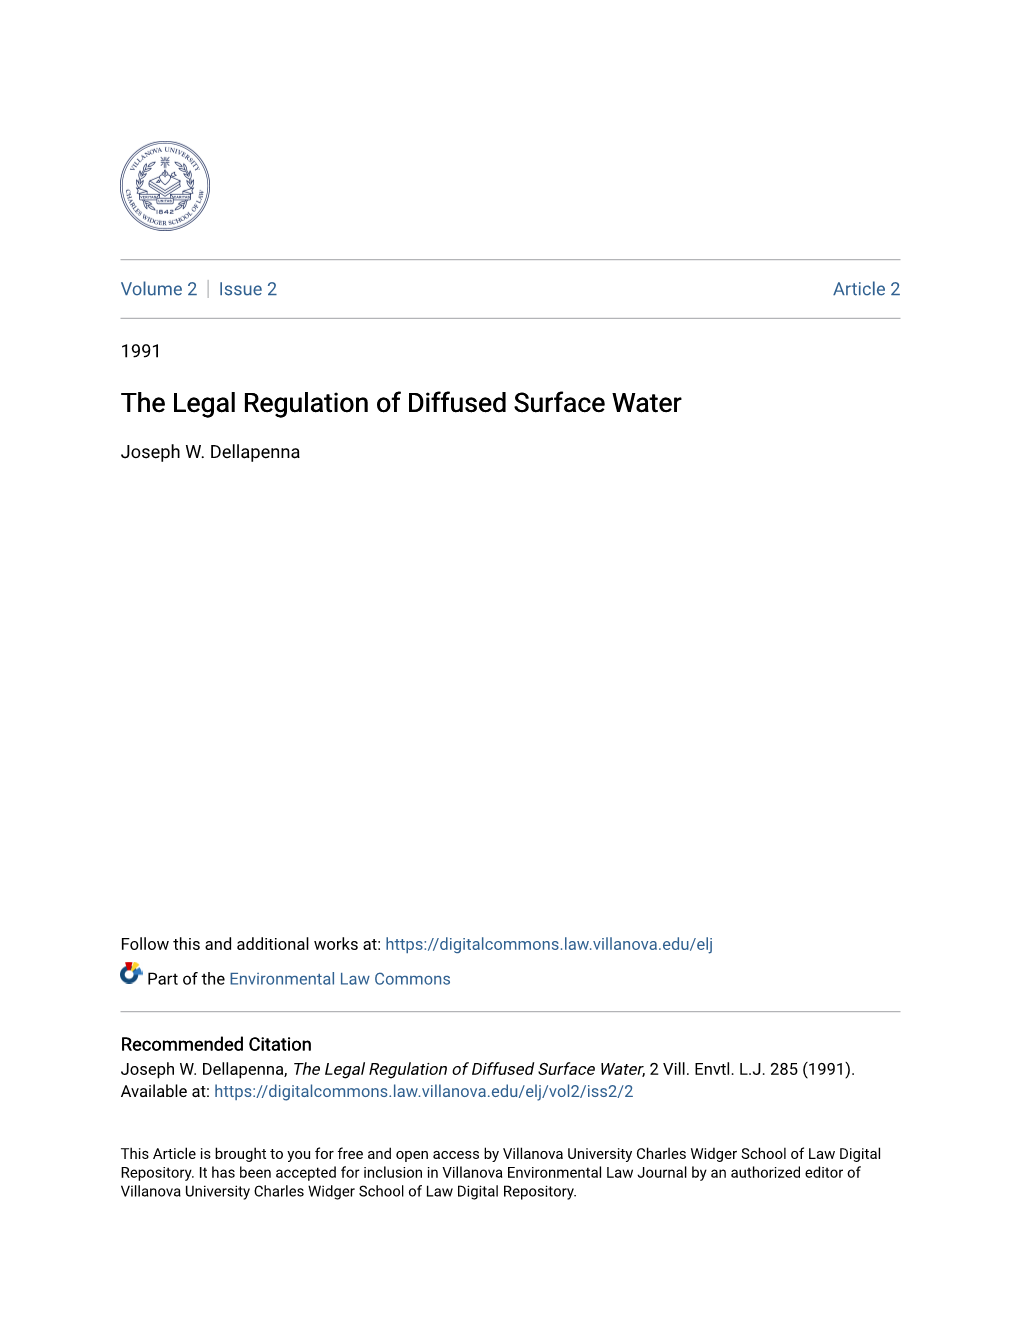 The Legal Regulation of Diffused Surface Water